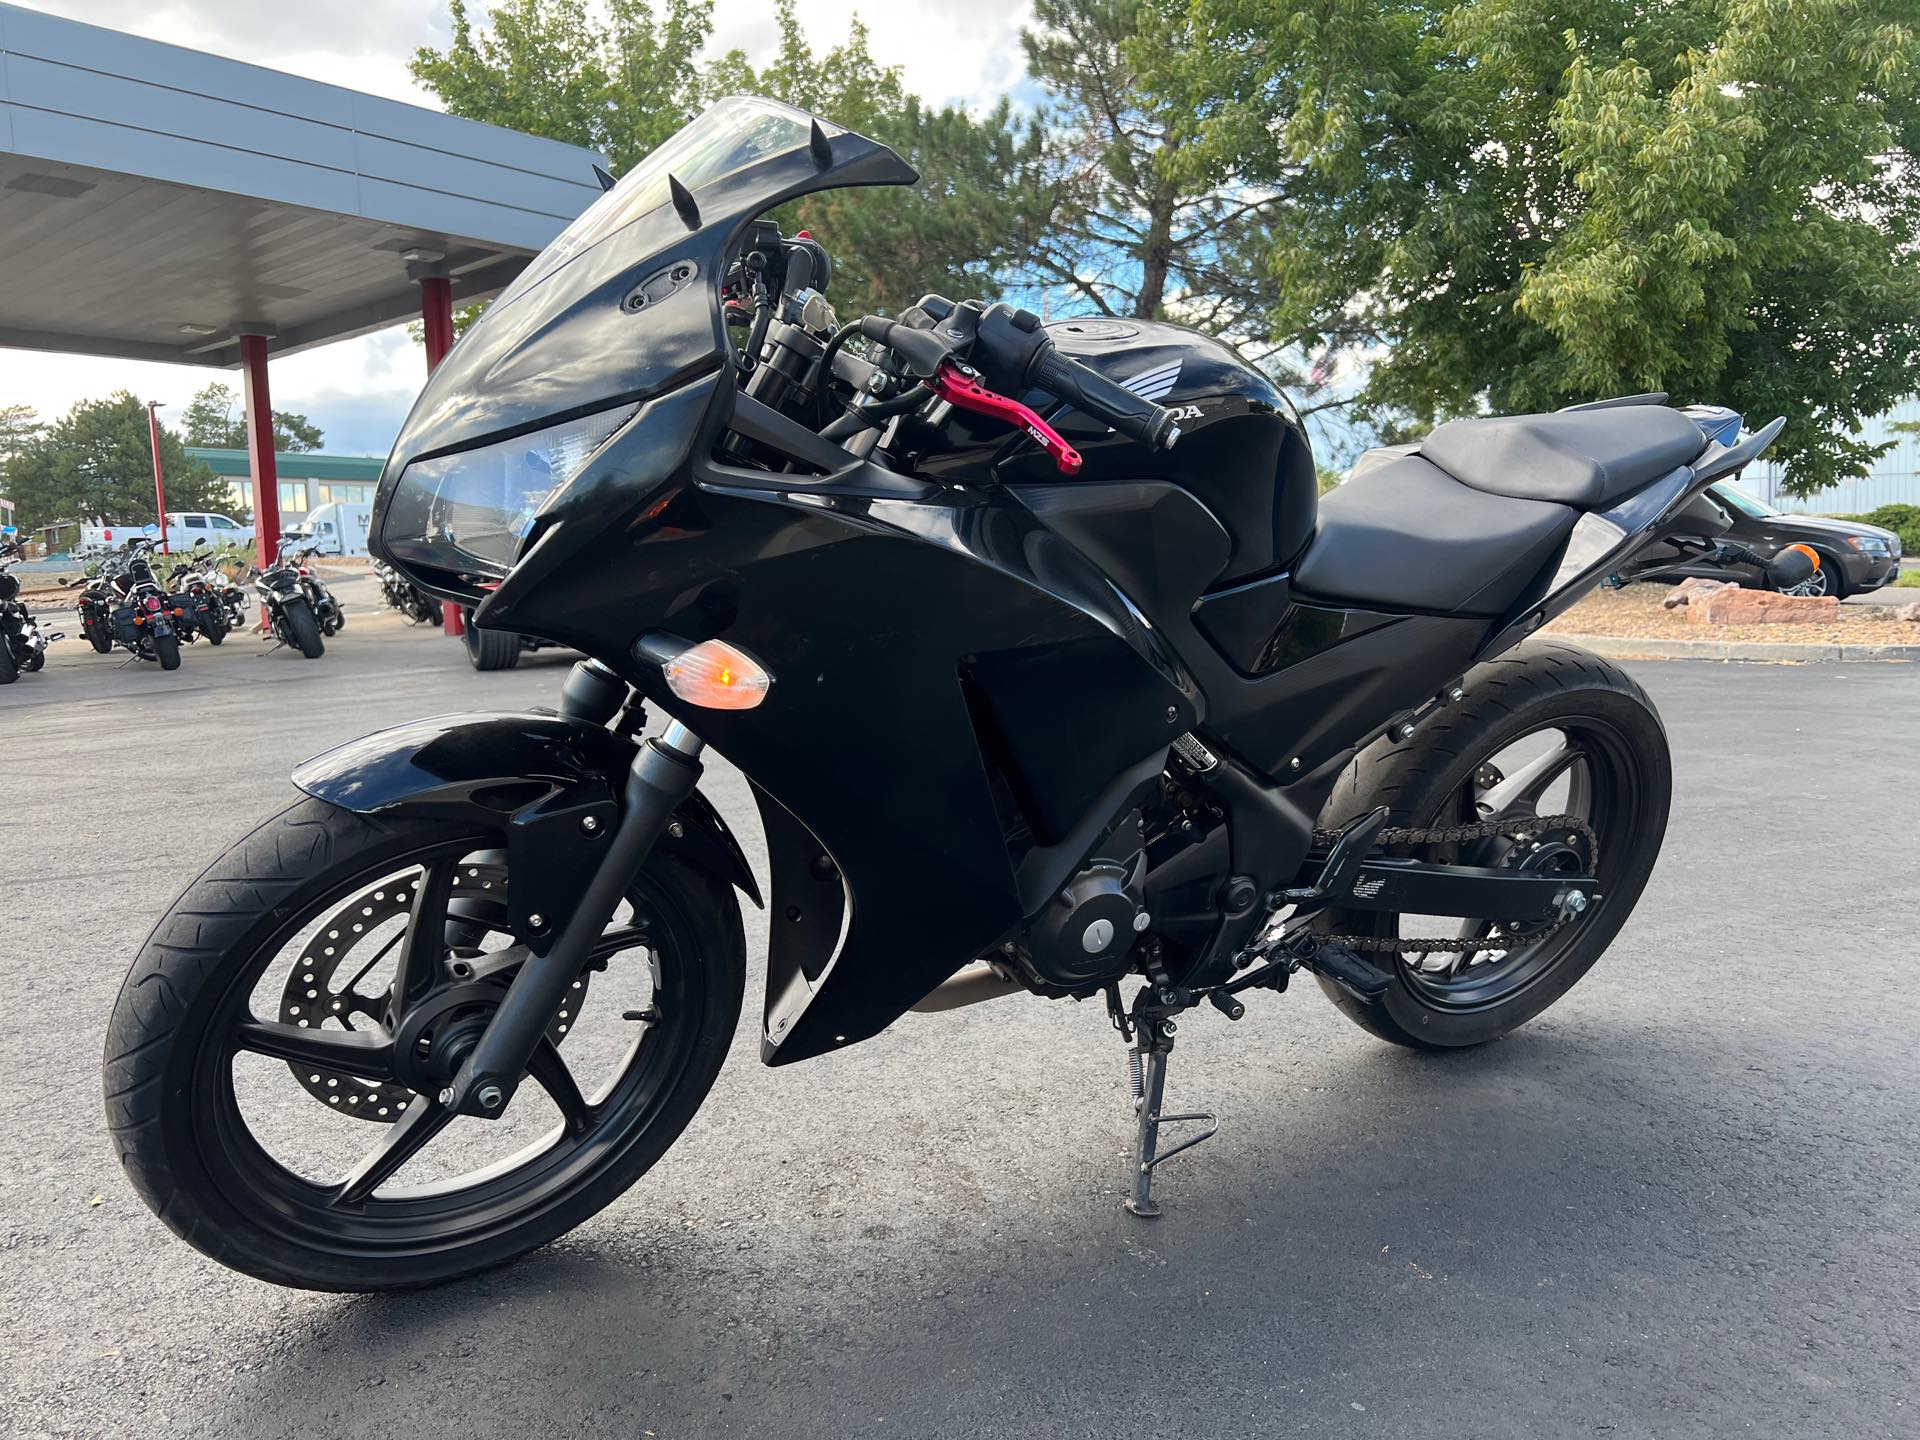 2015 Honda CBR 300R at Aces Motorcycles - Fort Collins